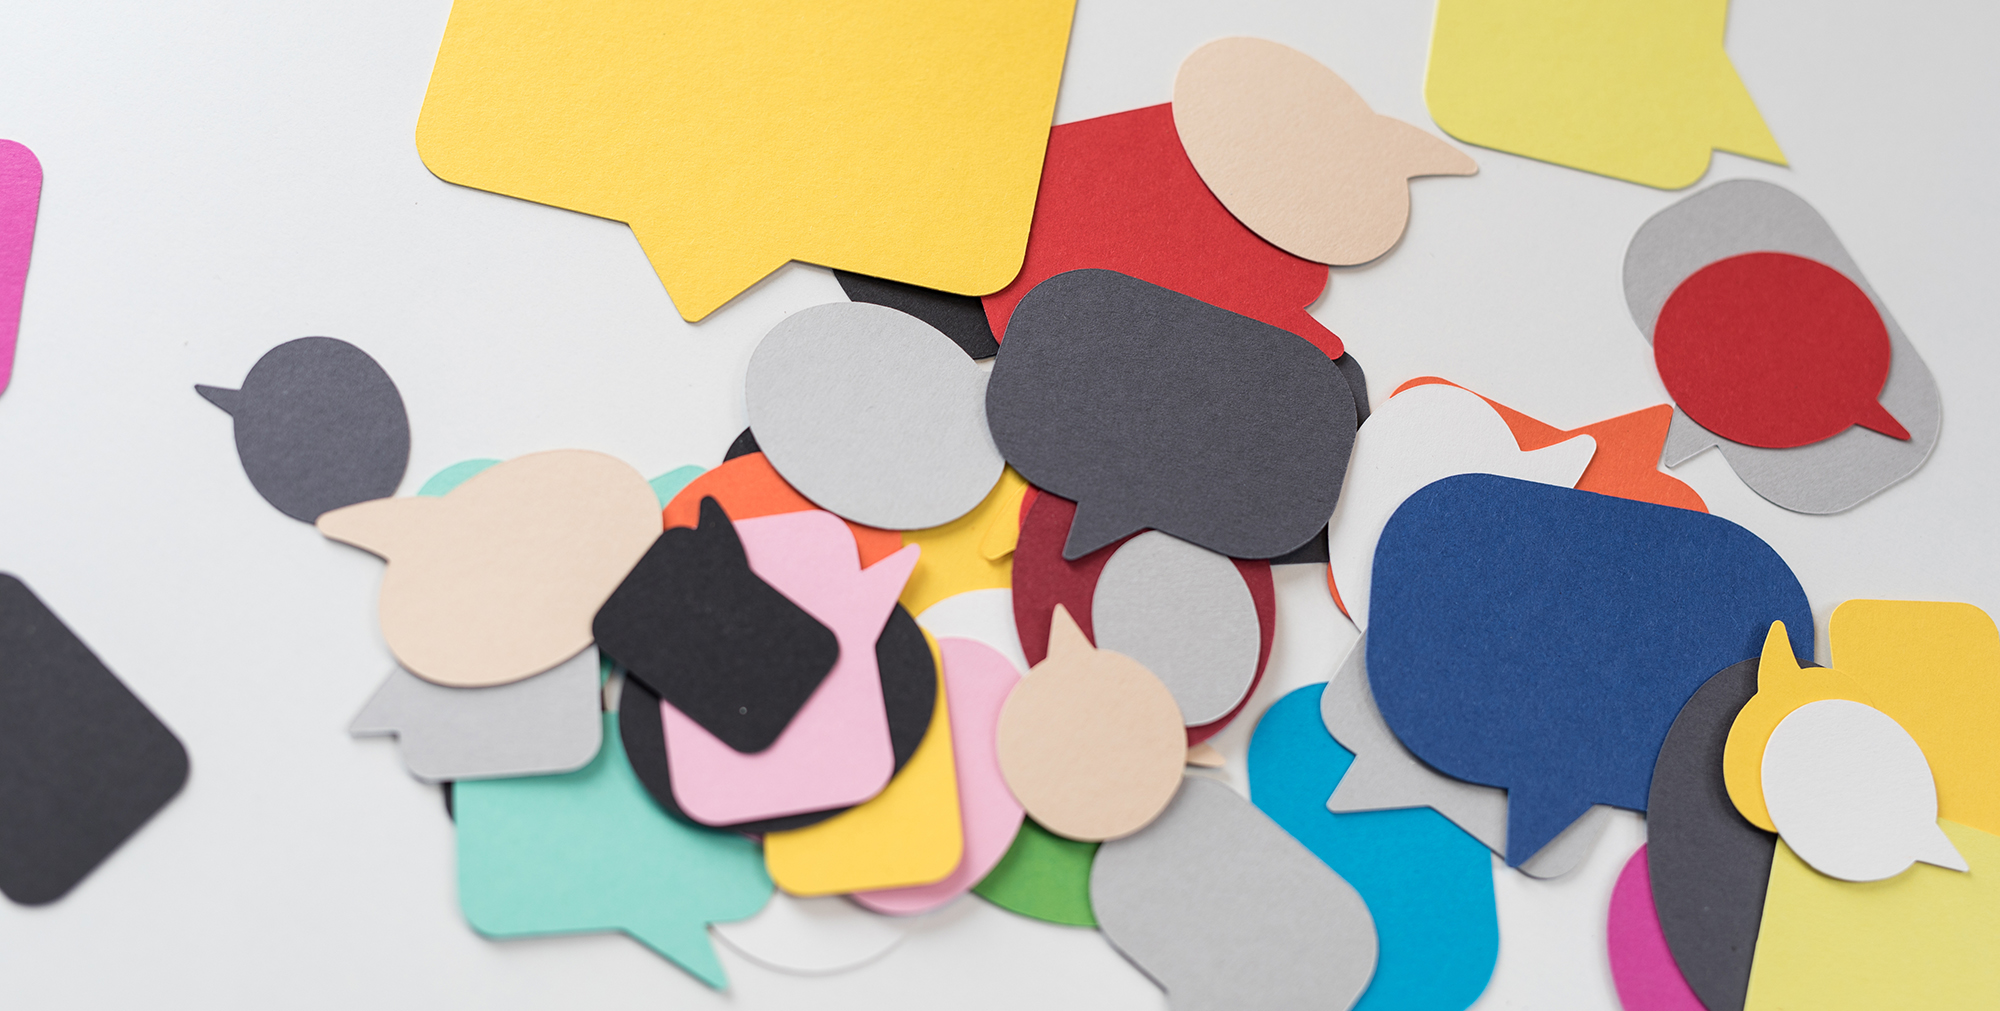 Image of colorful cut-outs of speech bubbles